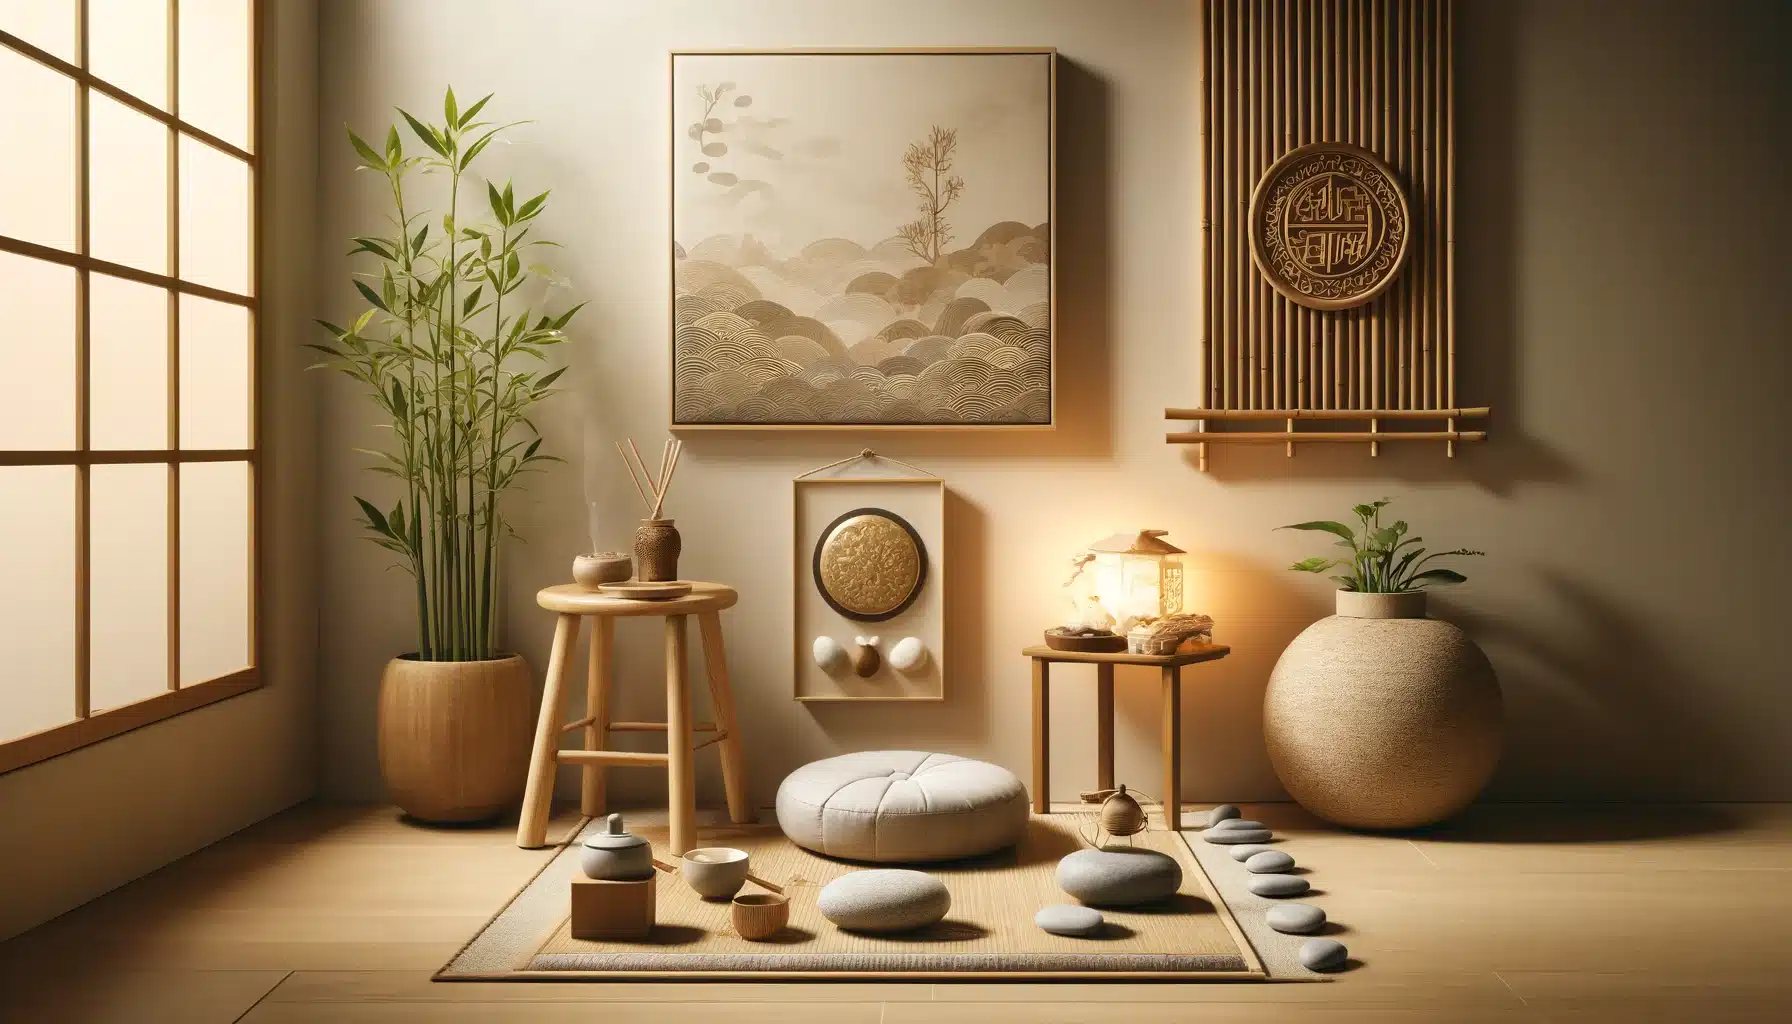 A display of Zen meditation corner essentials for creating serene spaces, in landscape layout. The image should include a small wooden stool, a meditation cushion, a low table with a tea set, an incense holder with light smoke, and a wall hanging with Zen-inspired art. The corner is decorated with natural elements like bamboo plants, smooth pebbles, and a calming water feature. Soft, natural lighting enhances the peaceful ambiance of the space.